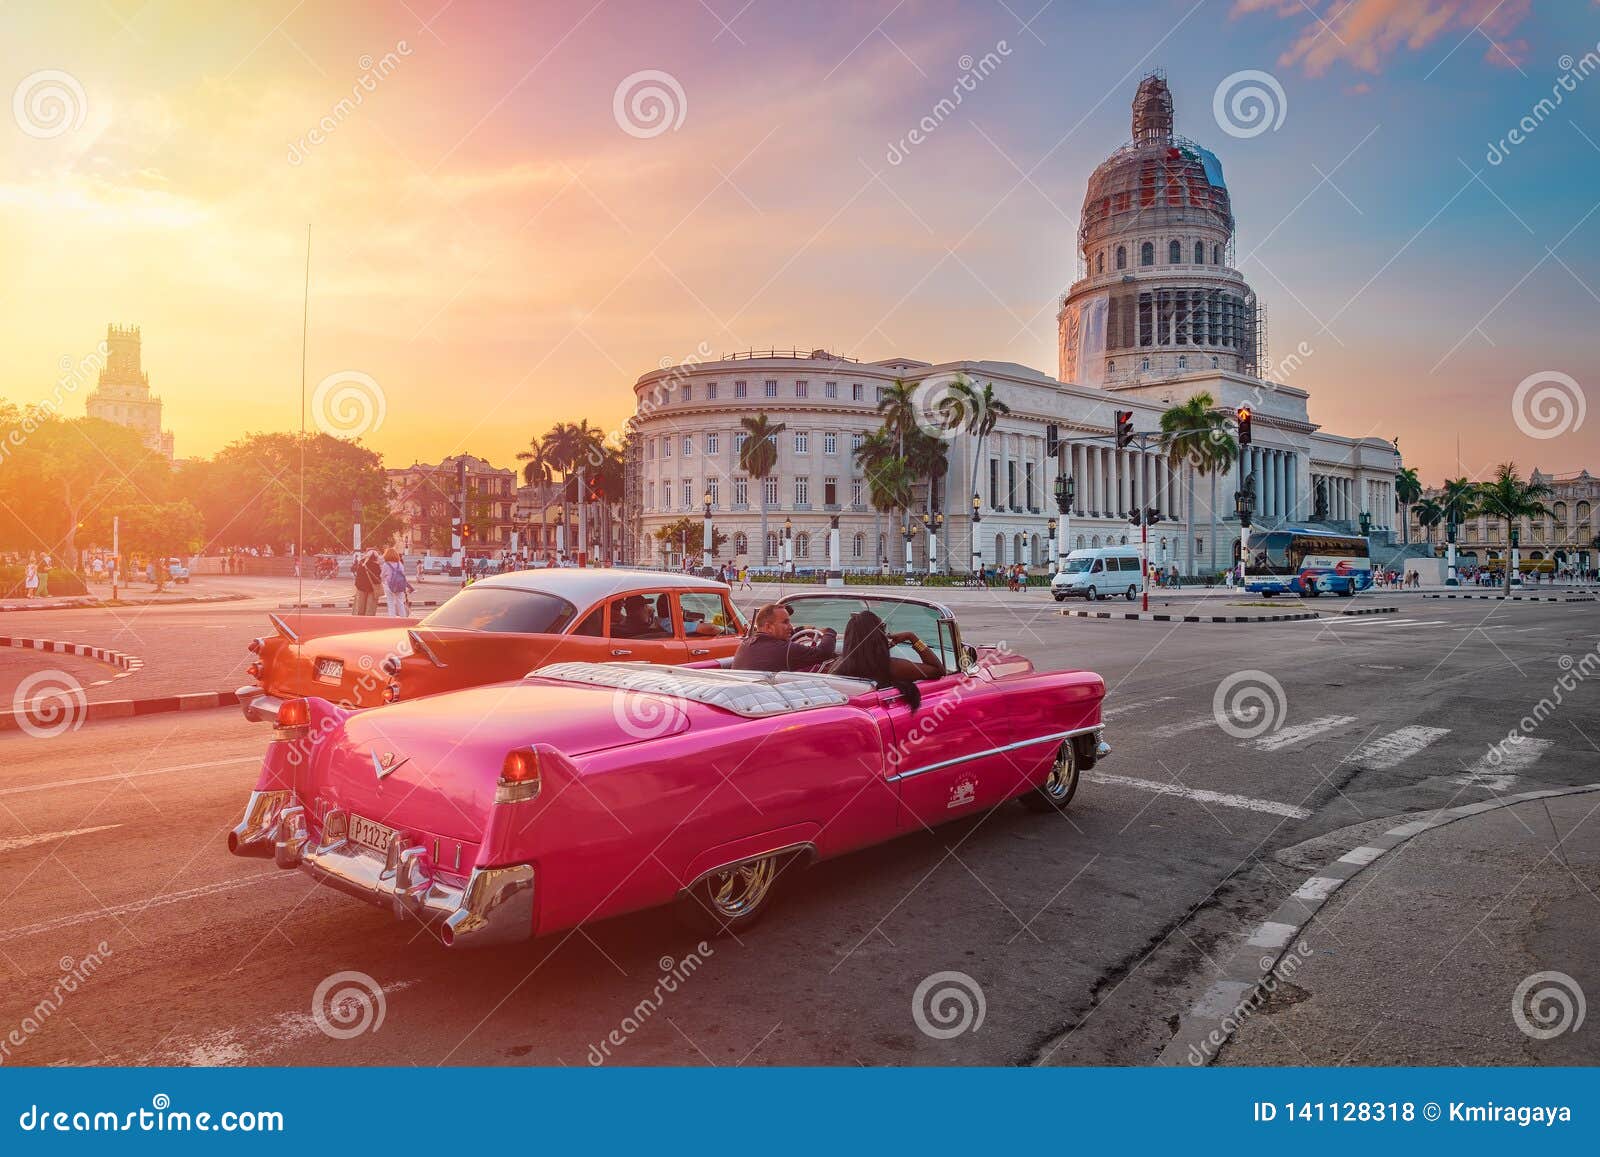 Classic Cars in Havana Near the Capitol at Sunset Editorial Stock Photo ...